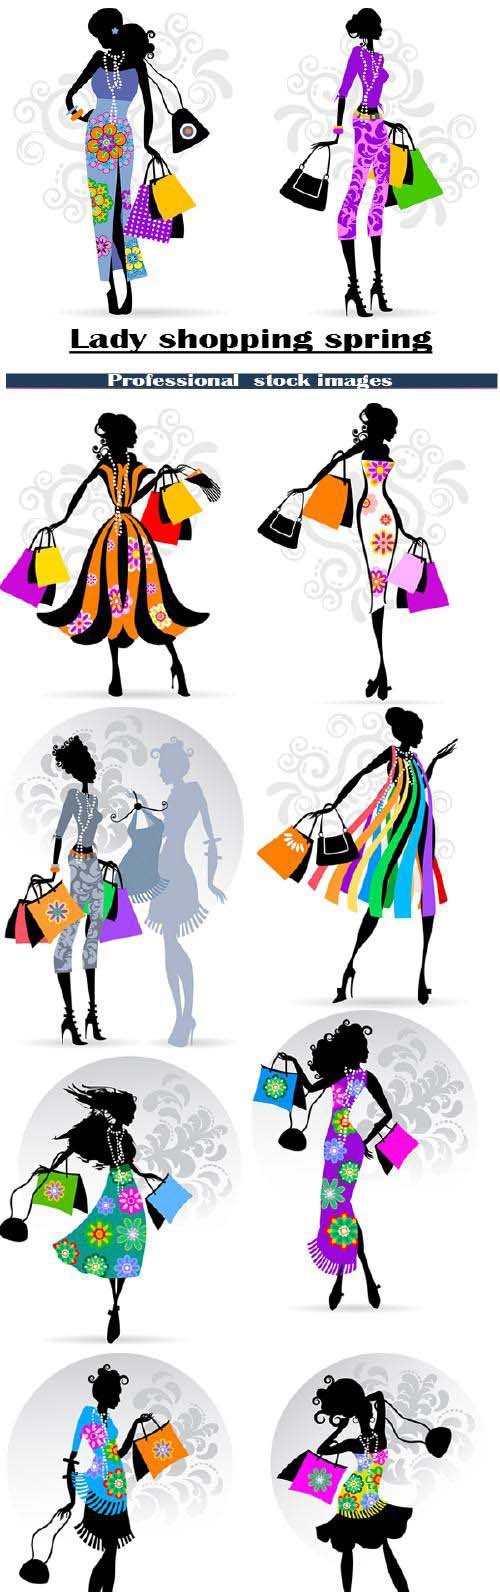 Women shopping in the spring